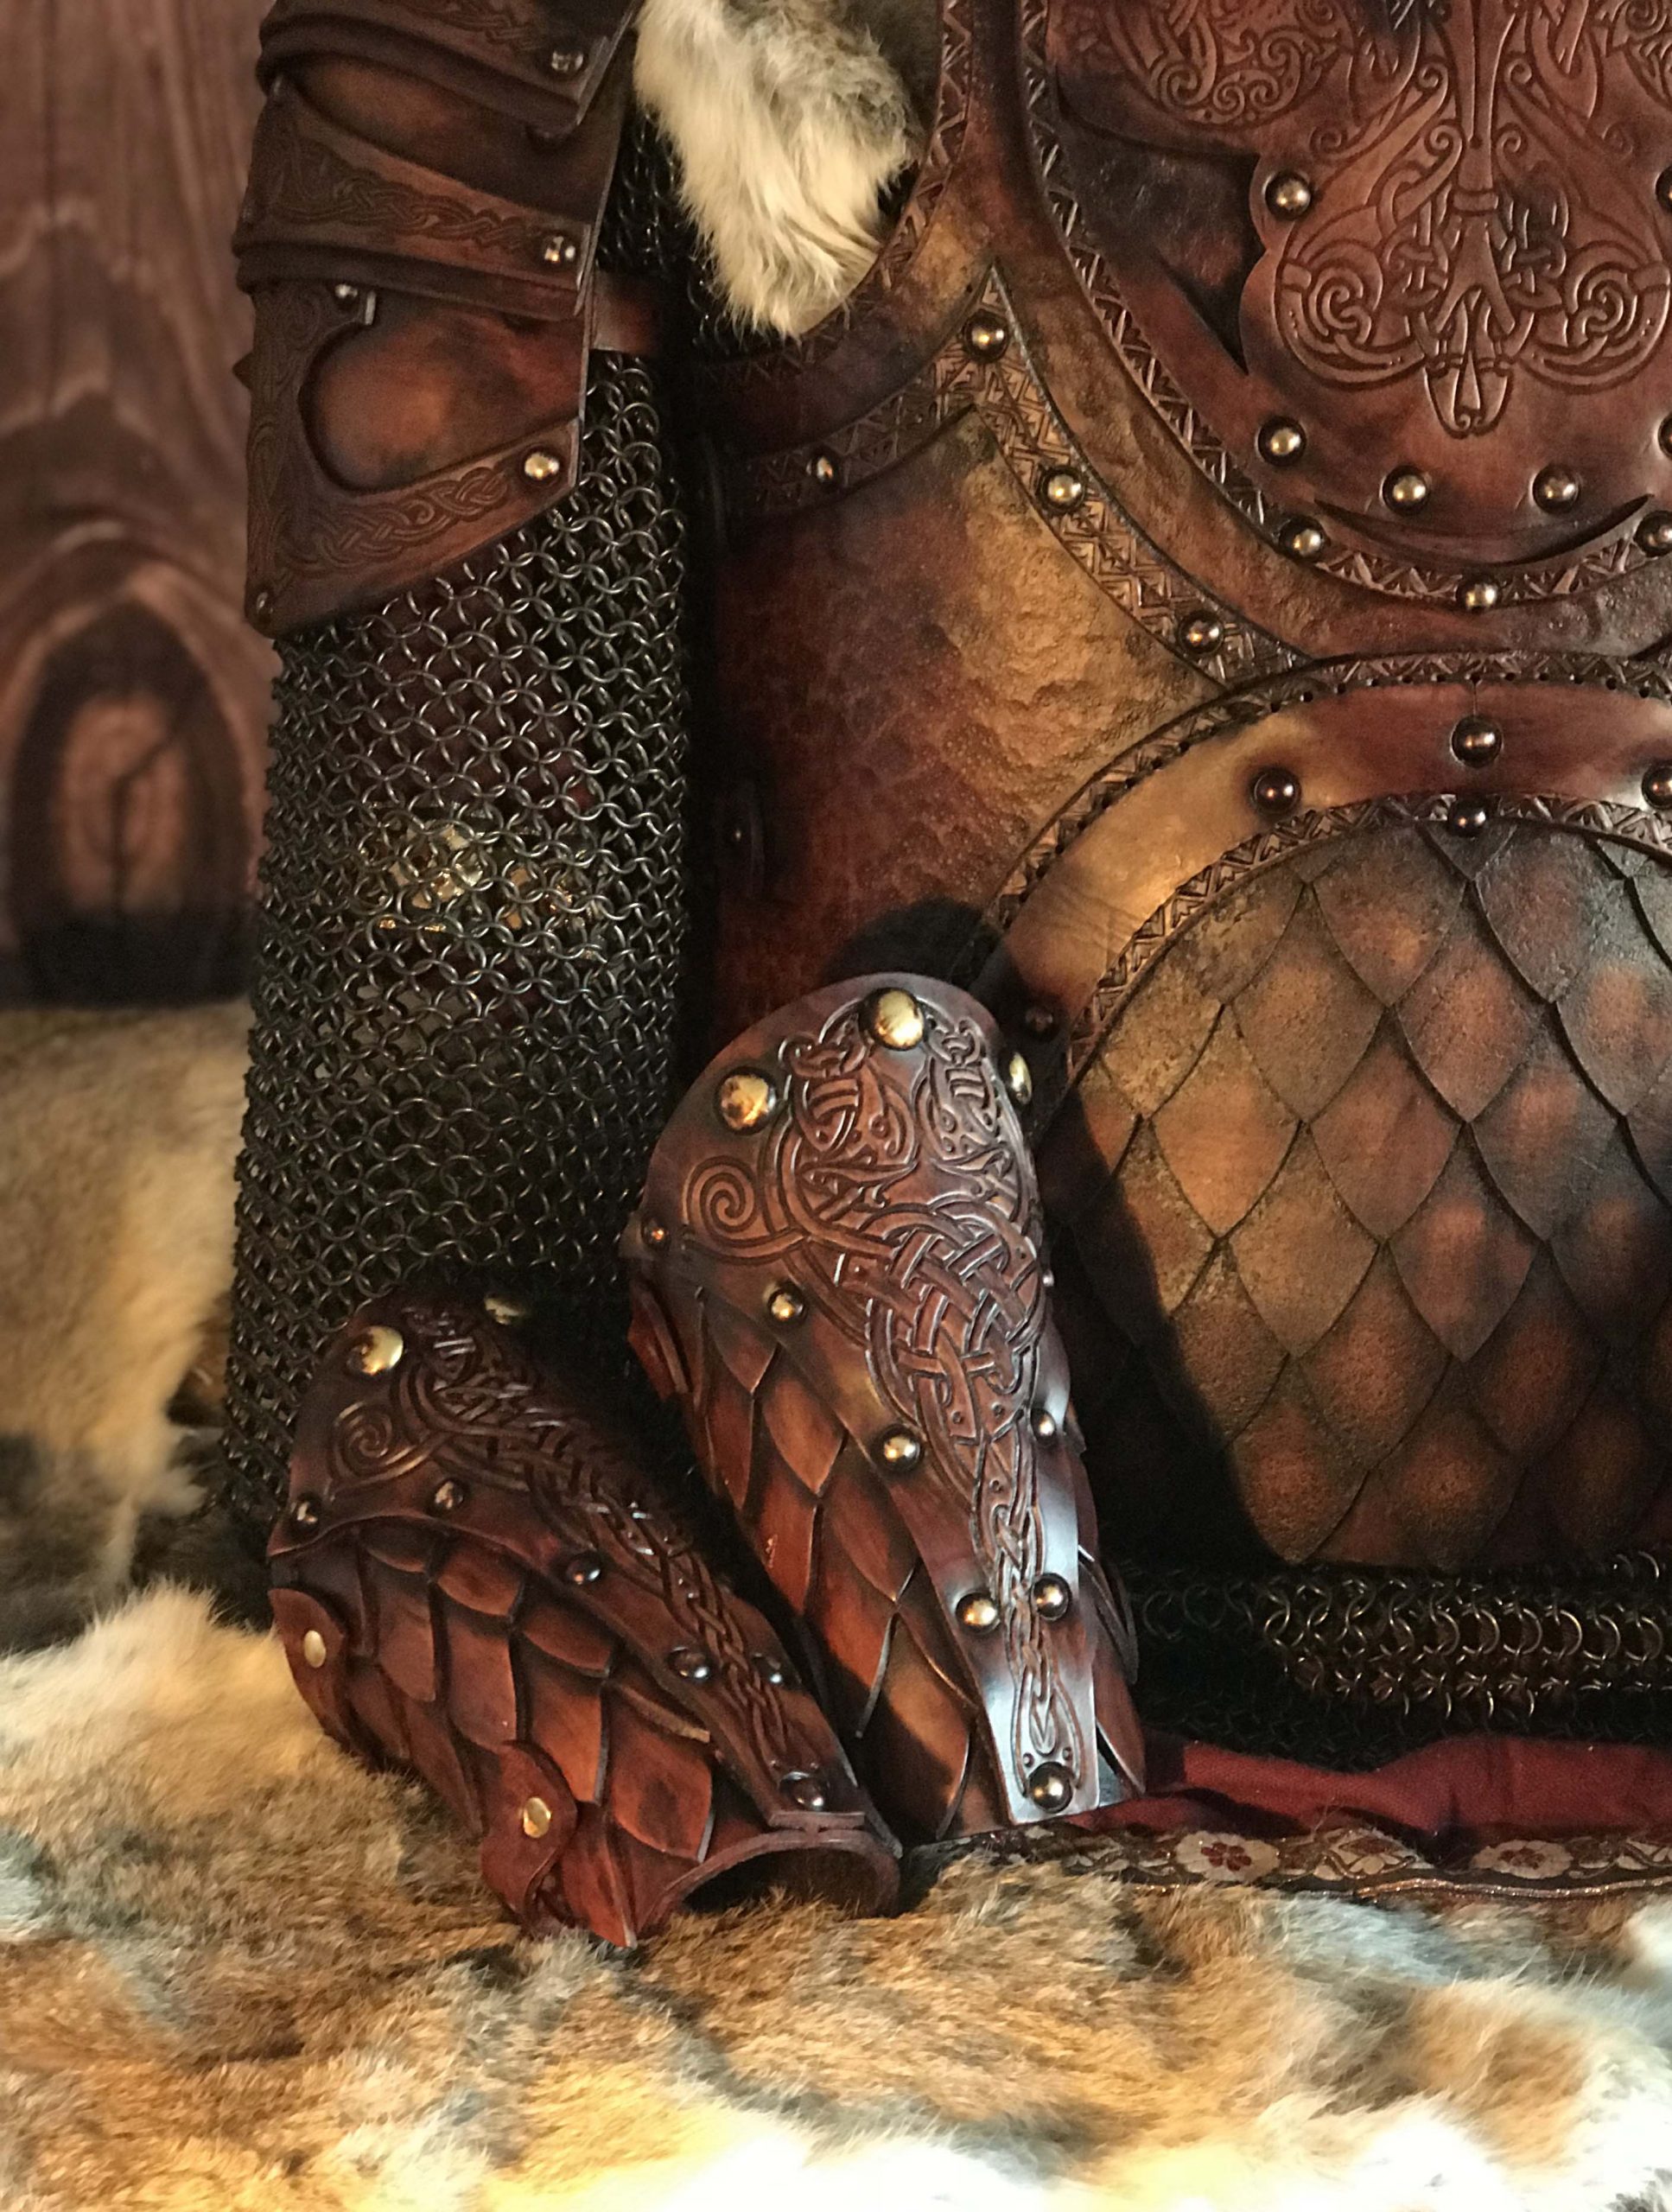 The Sigrun Deluxe SCA Leather Vambraces